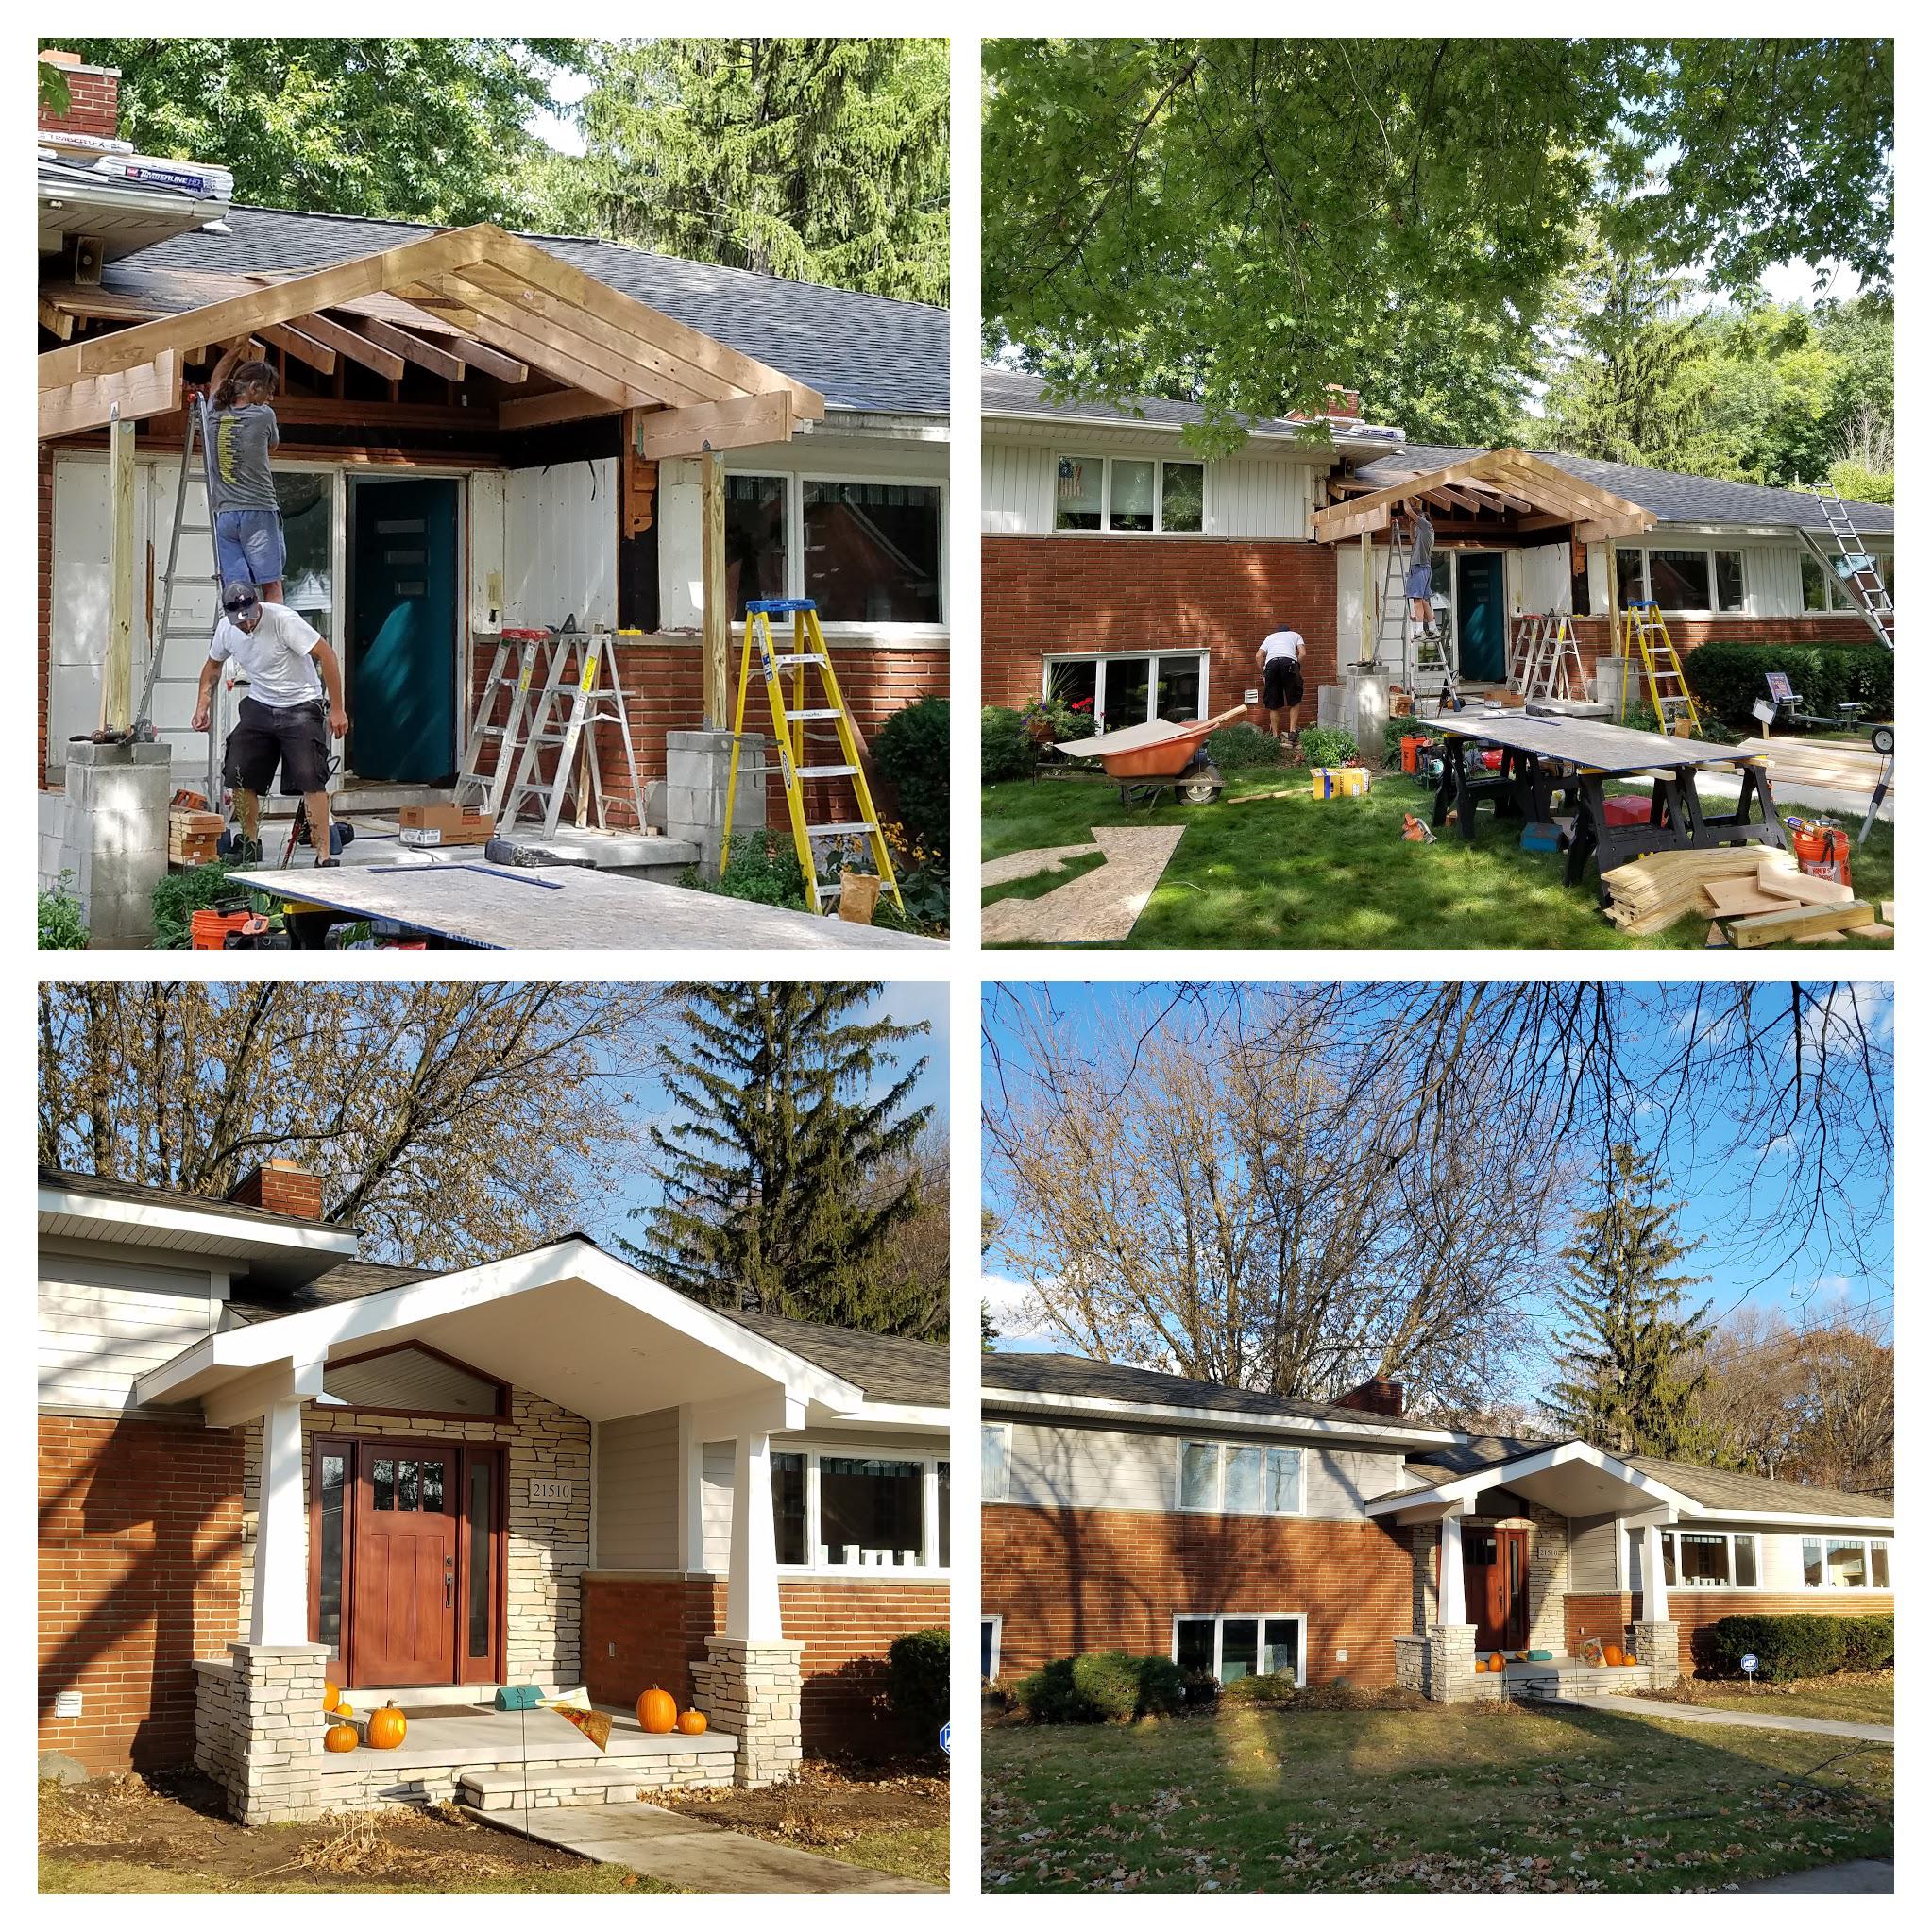 Custom front porch overhang and installation of James Hardie siding NorthWest Construction Dearborn (313)277-7676